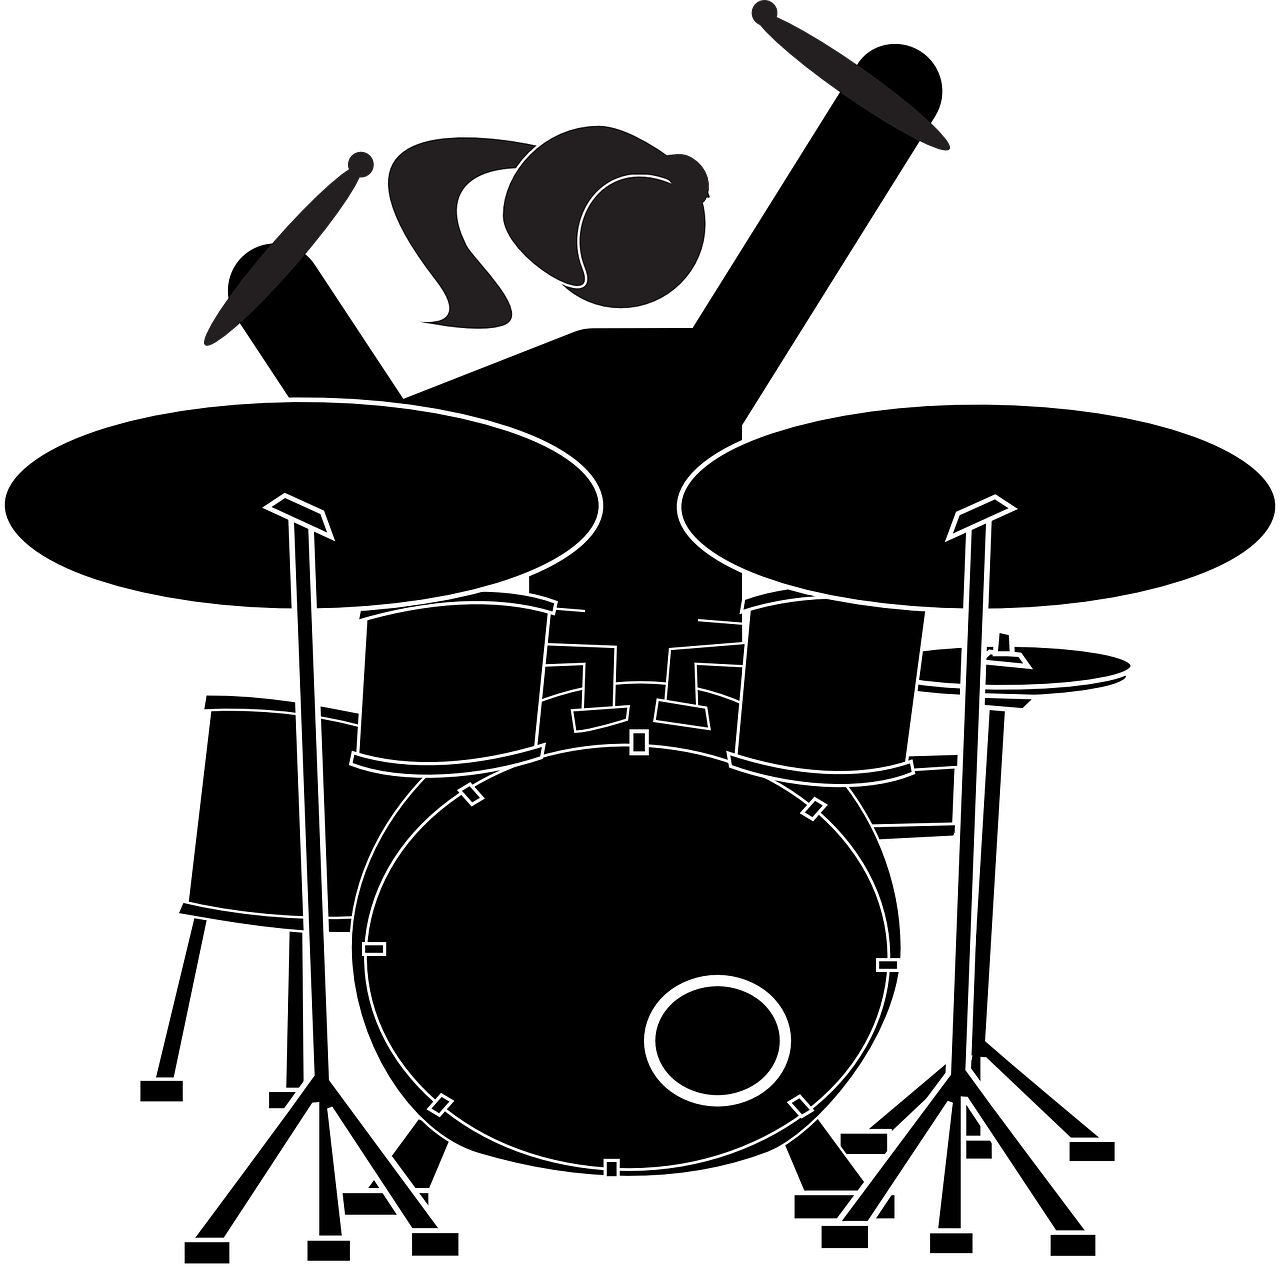 a black and white drawing of a drum set, an album cover, by Jim Davis, pixabay, figuration libre, fun pose, tshirt design, colored accurately, uncompressed png